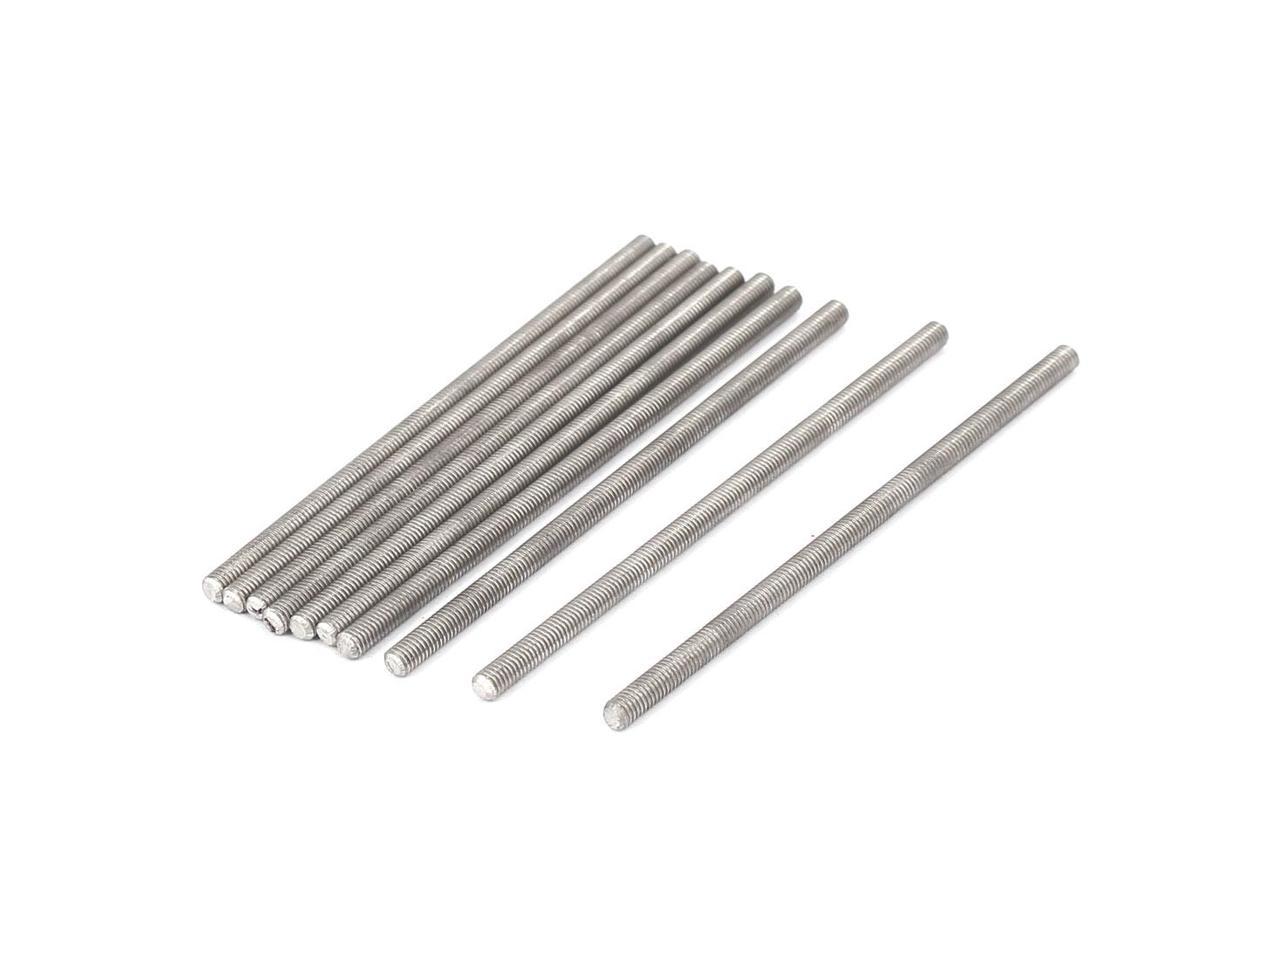 M3 x 70mm 0.5mm Pitch 304 Stainless Steel Fully Threaded Rods Silver ...